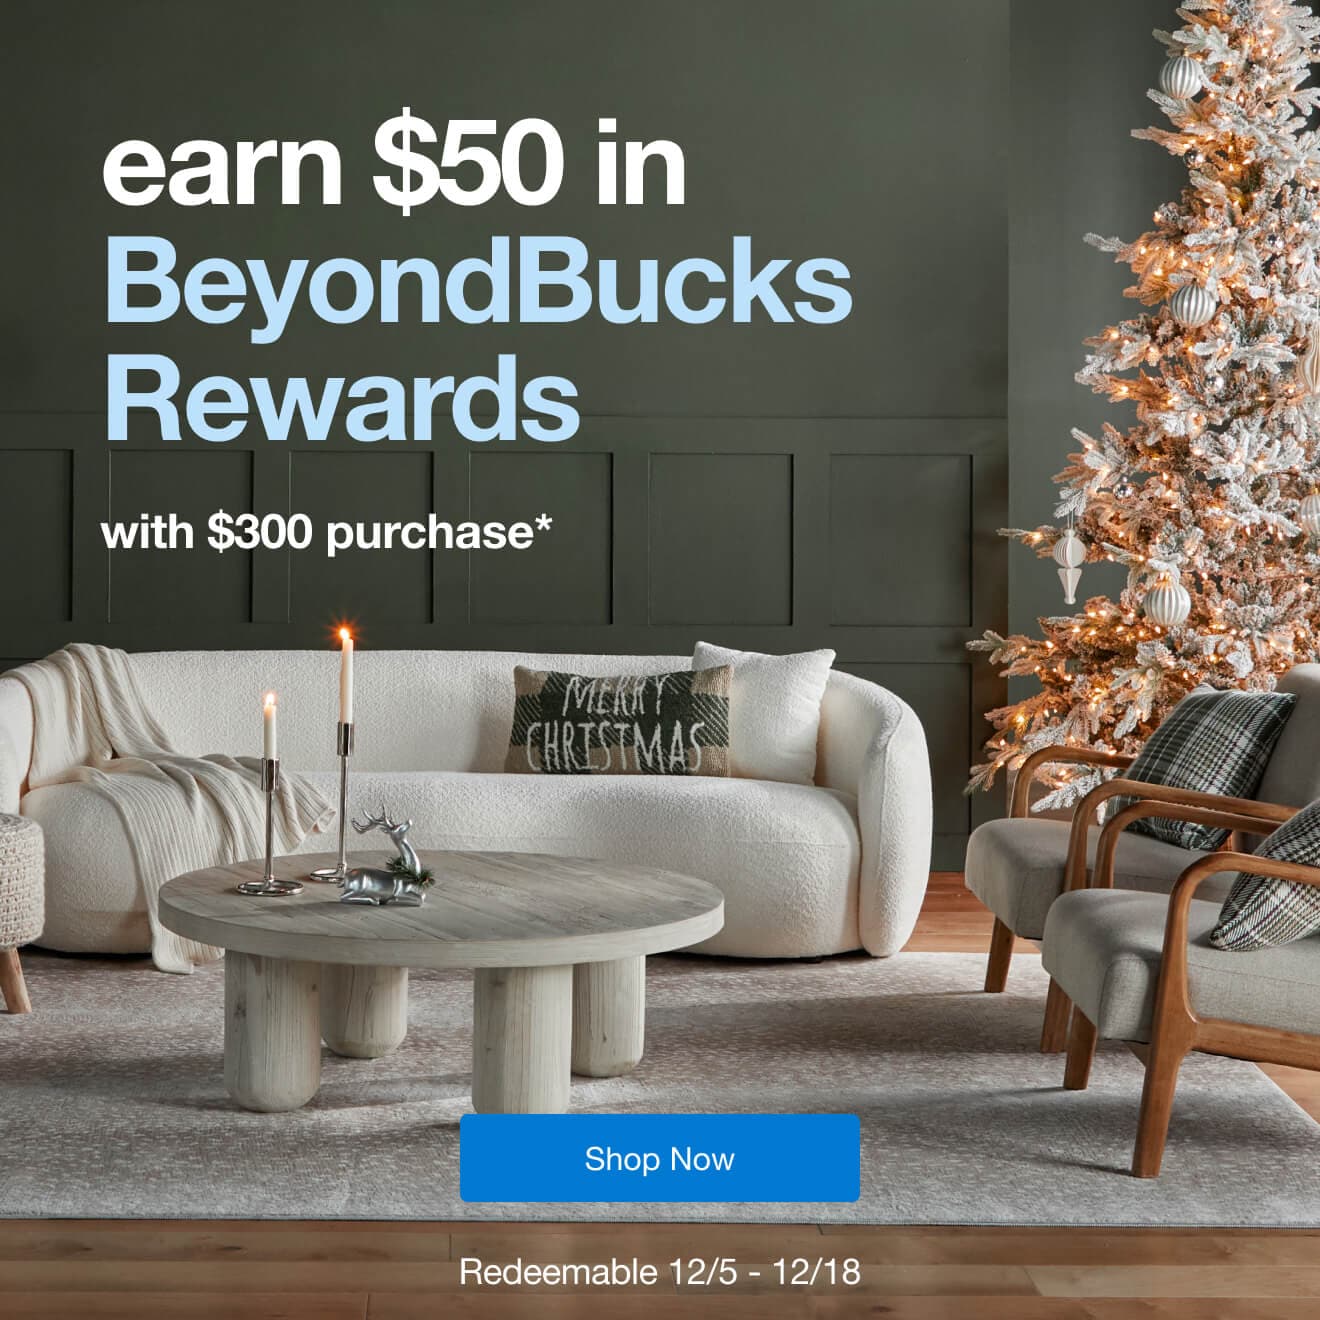 Earn $50 rewards with $300 purchase!